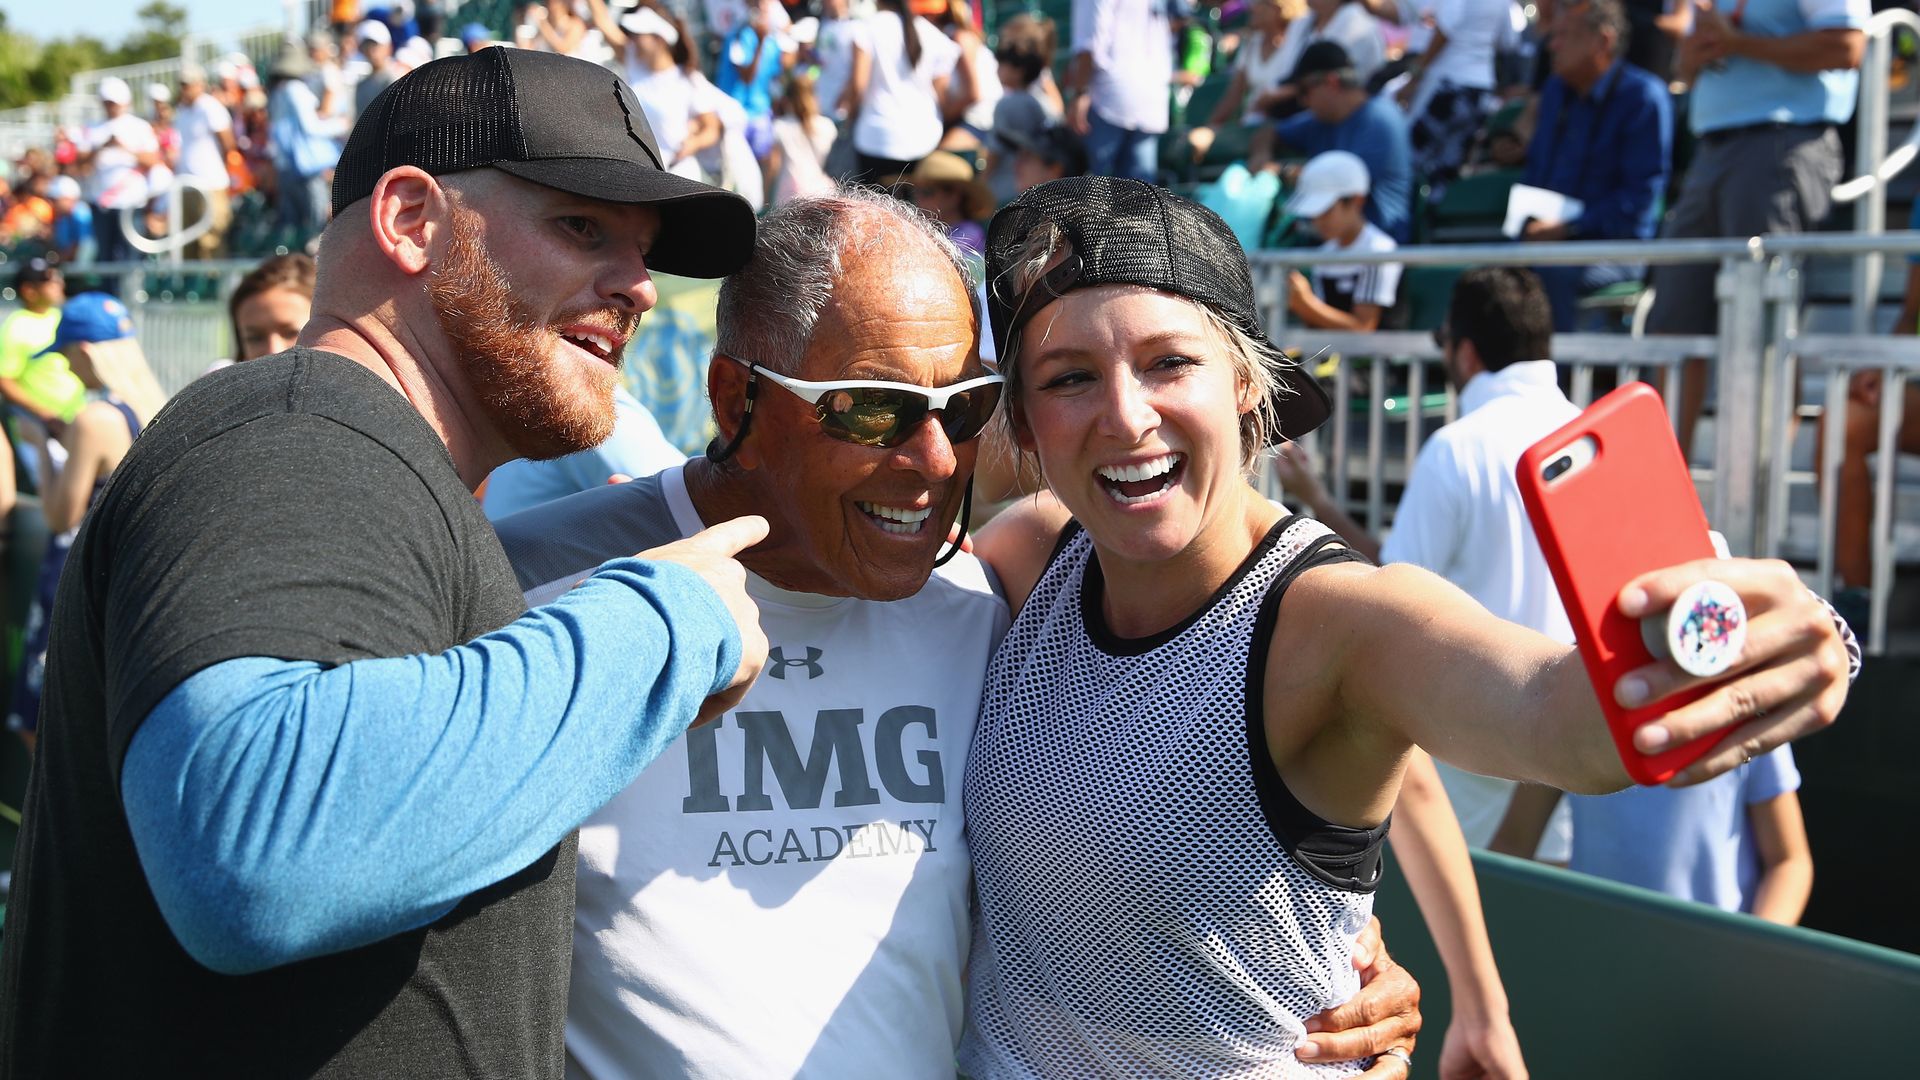 Bethanie Matek Sands of the United States takes a selfie with tennis coach Nick Bollettieri after taking part at the Kids Day event 